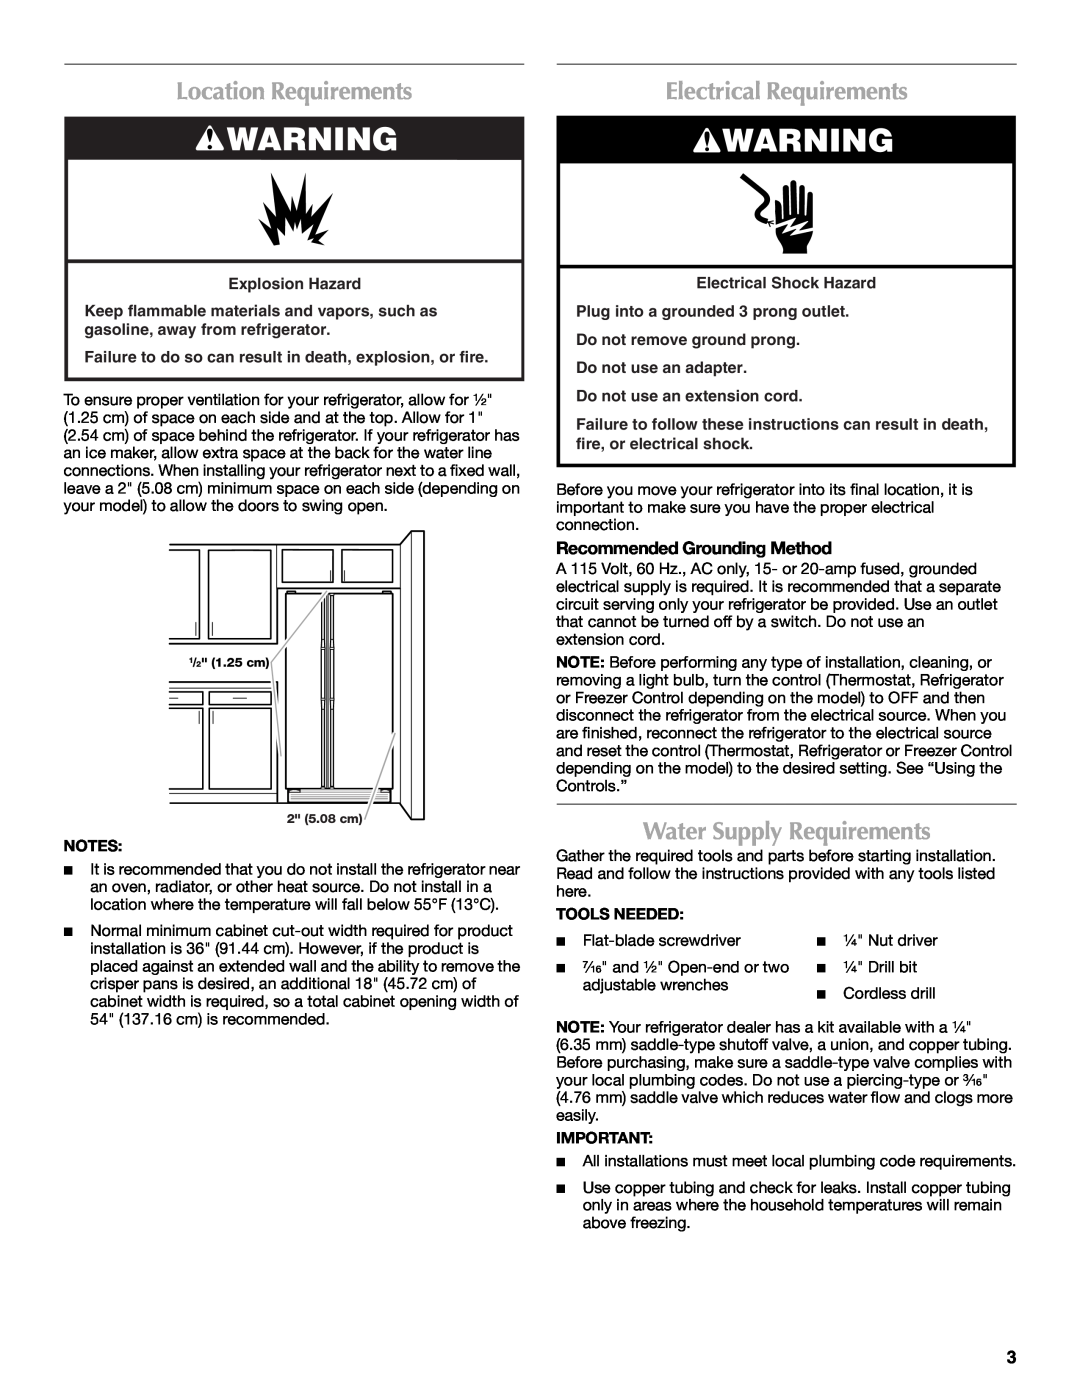 Maytag W10321477A Location Requirements, Electrical Requirements, Water Supply Requirements, Recommended Grounding Method 